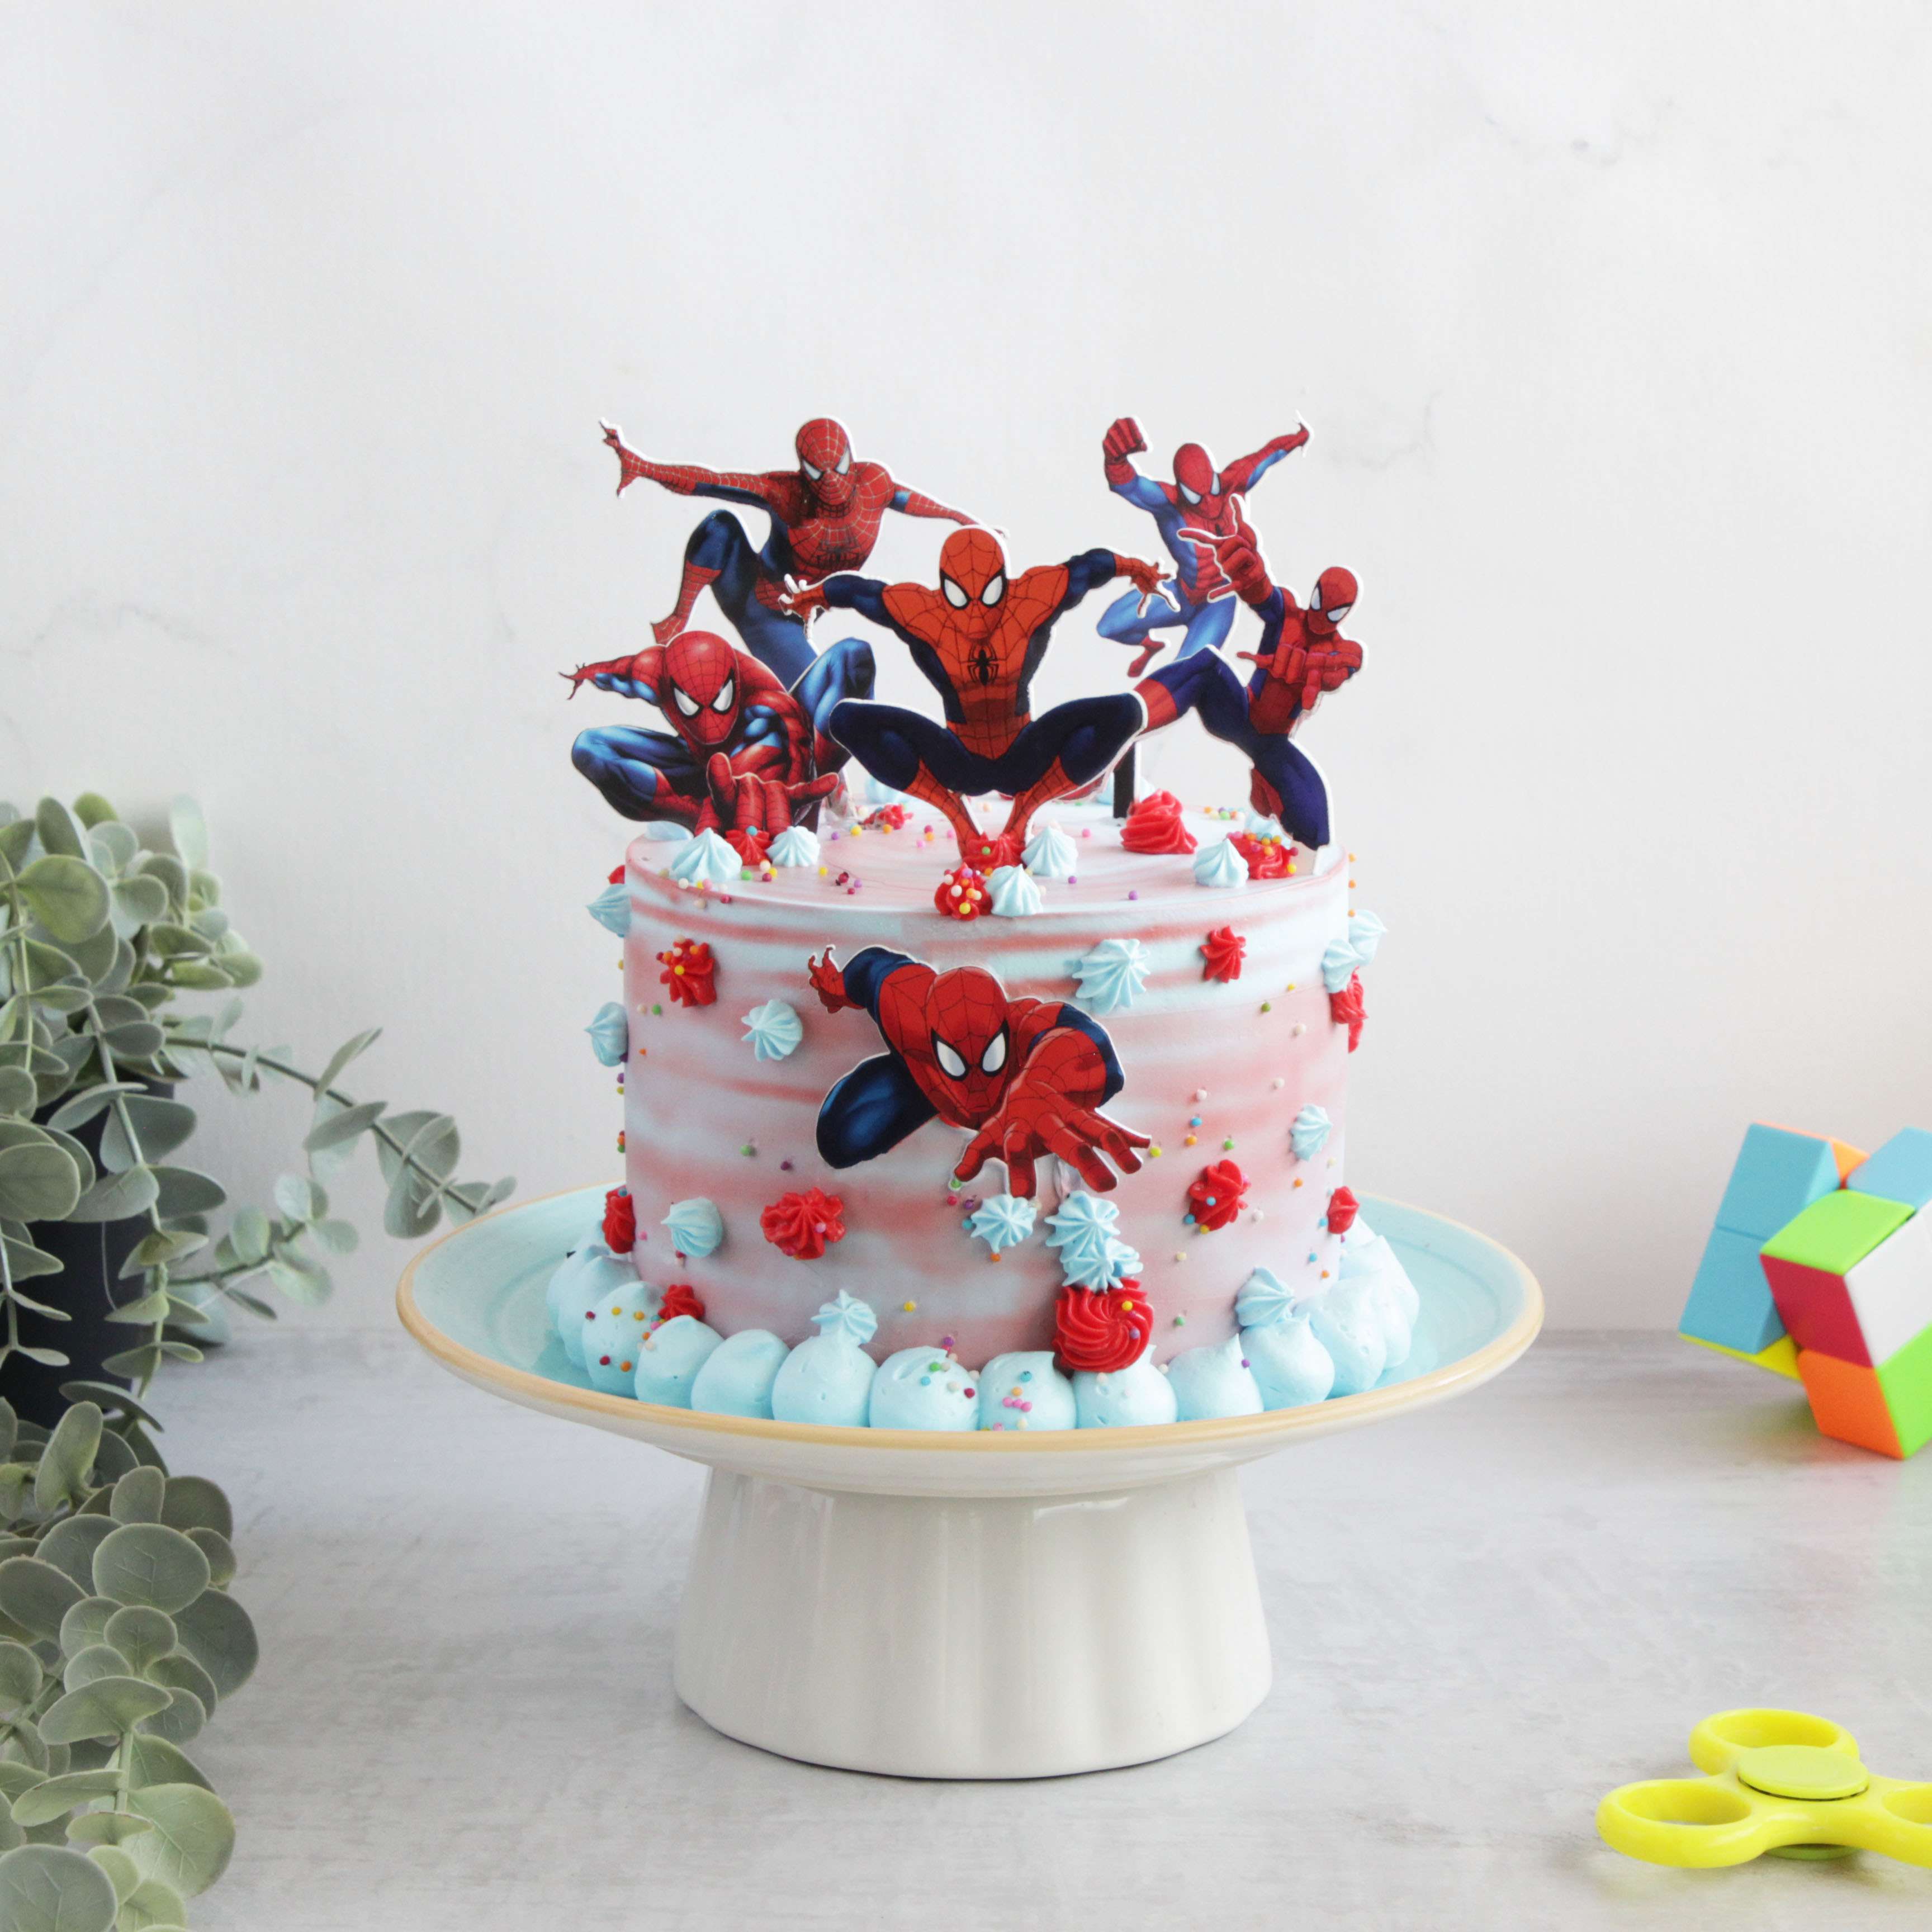 Spiderman Theme Cake - Cakesify | Order birthday cakes online from the best  home bakers.